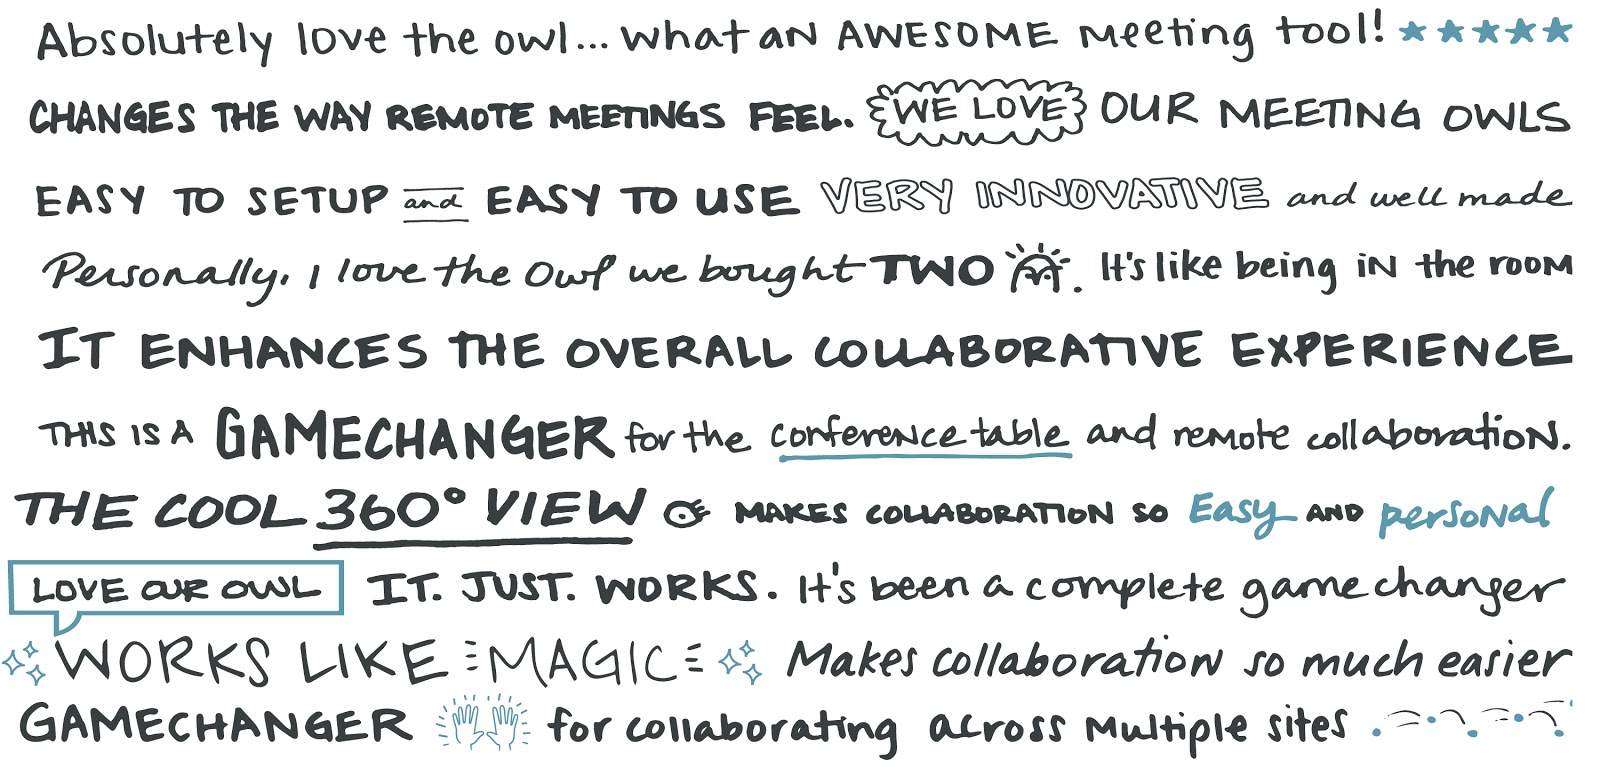 customer love for the meeting owl meeting owl reviews